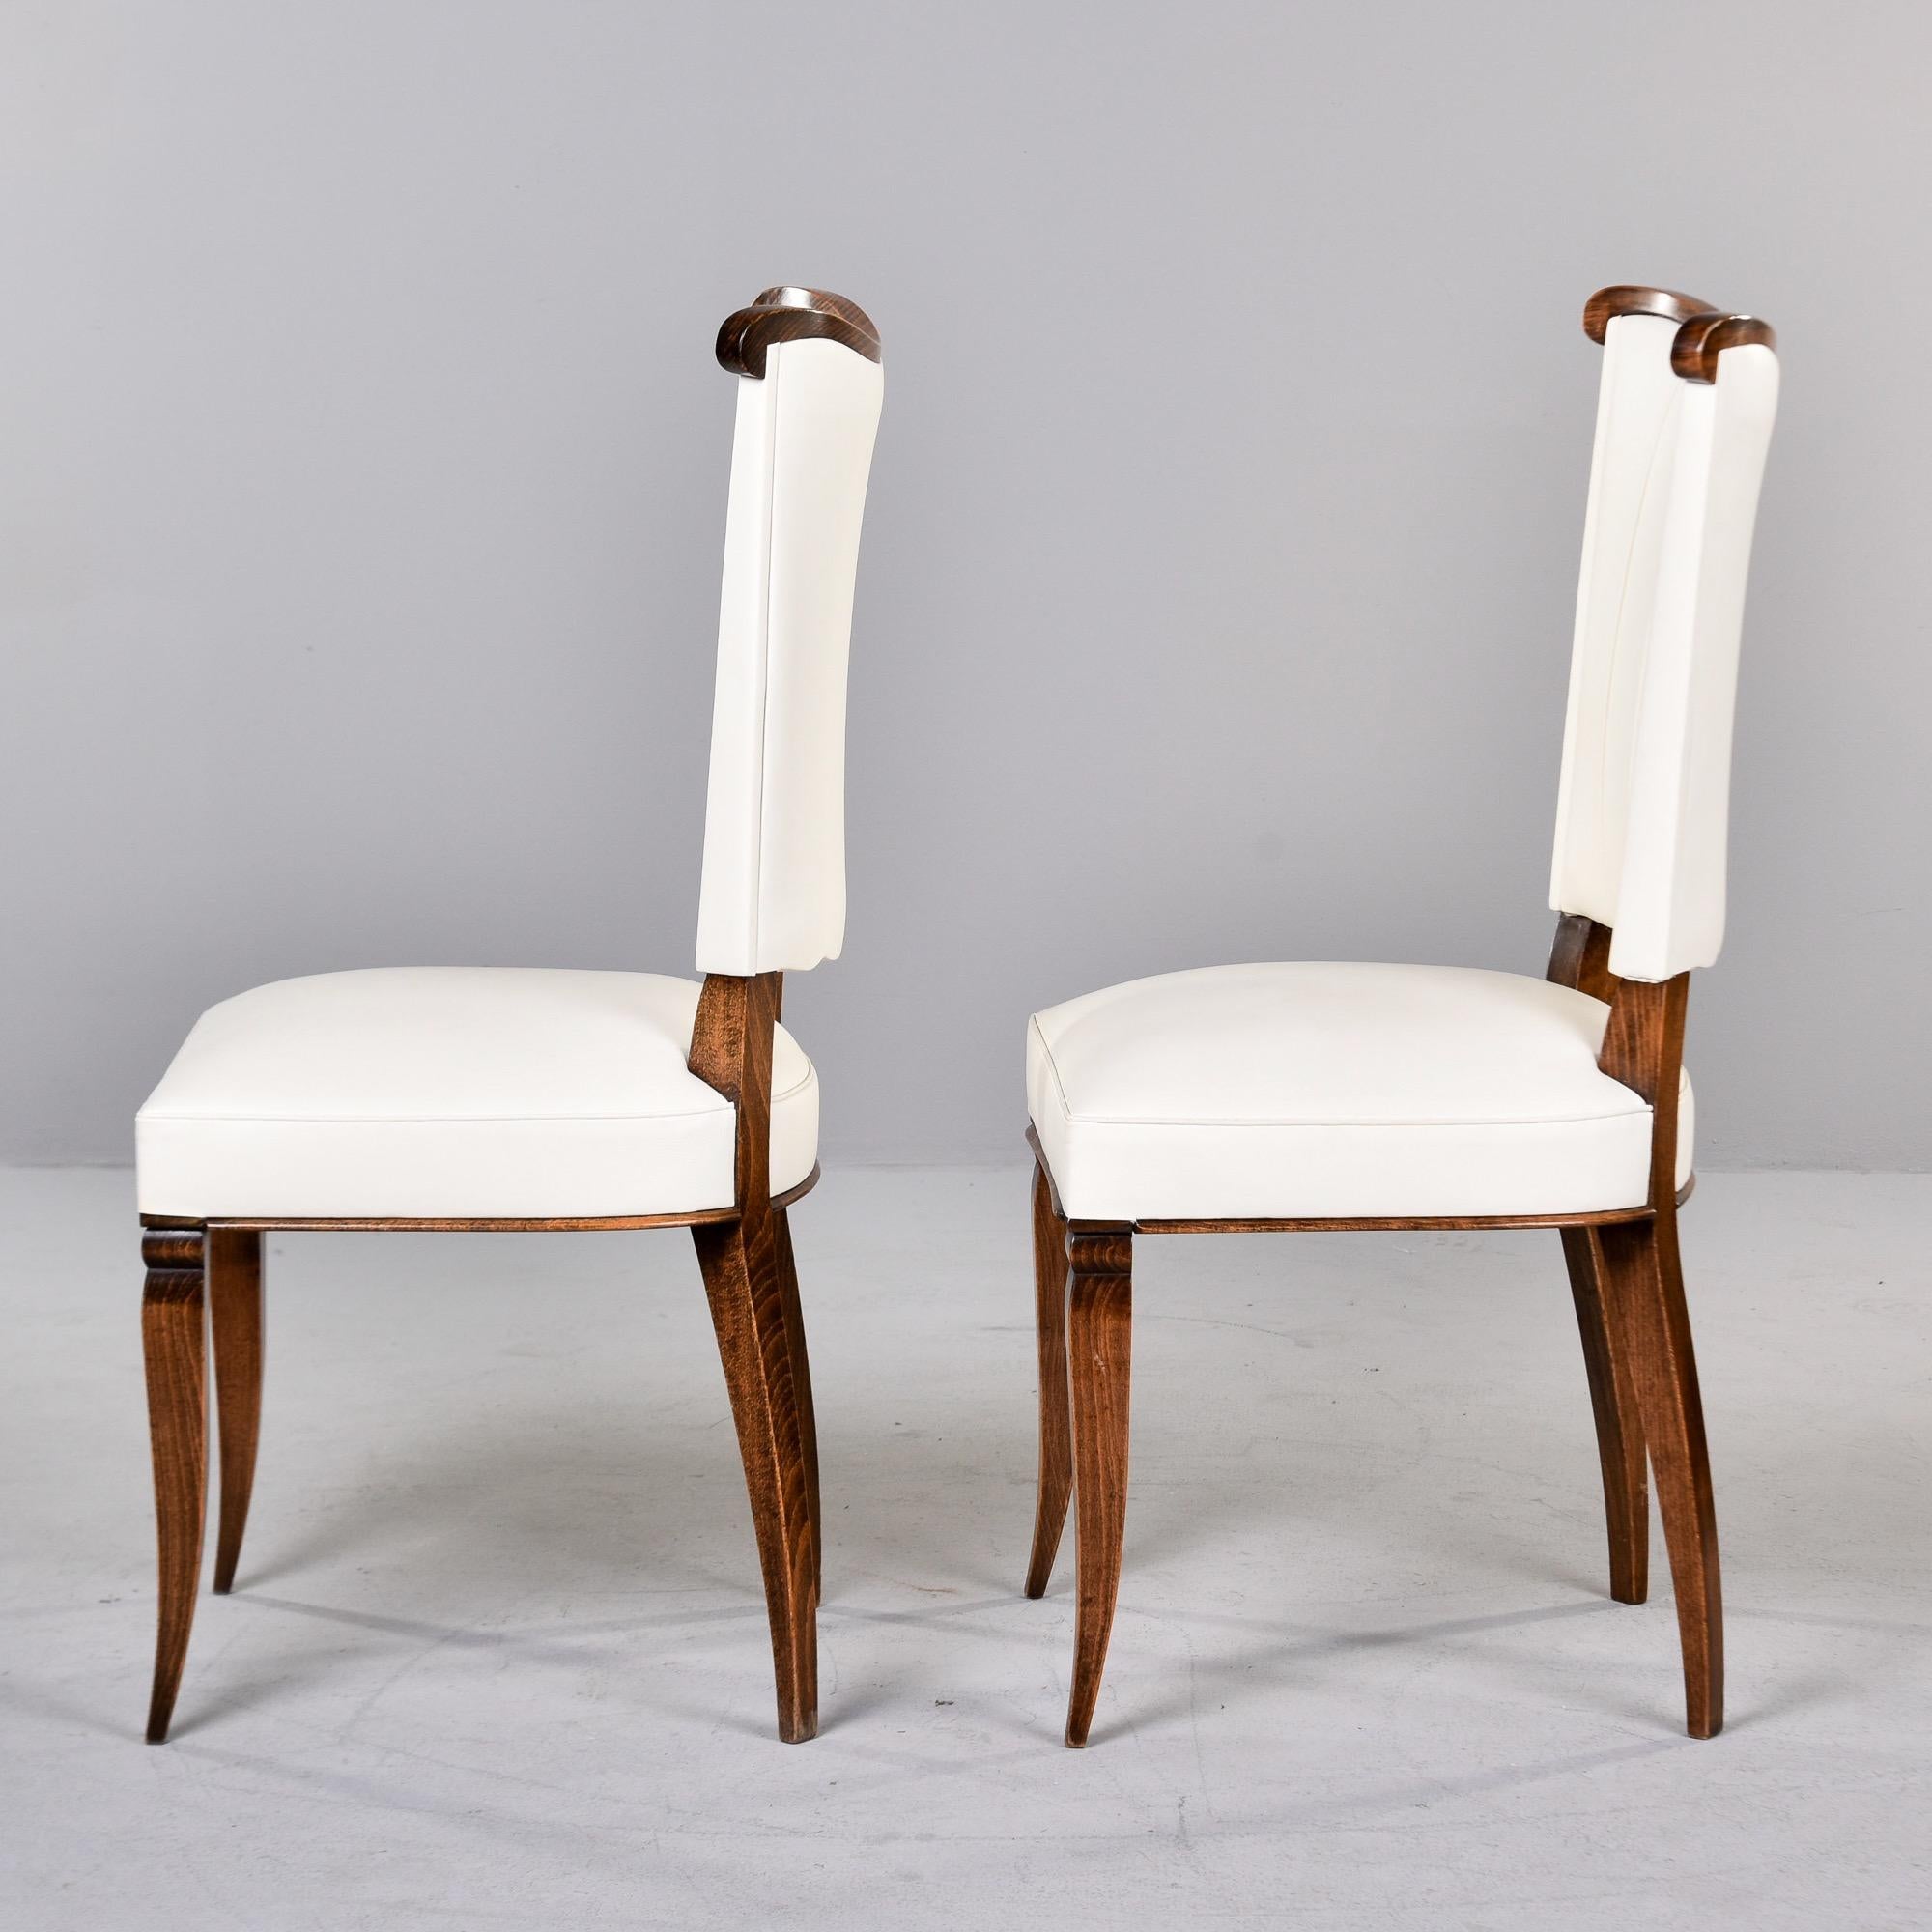 Set of 4 French Art Deco Chairs With White Leather Upholstery For Sale 2